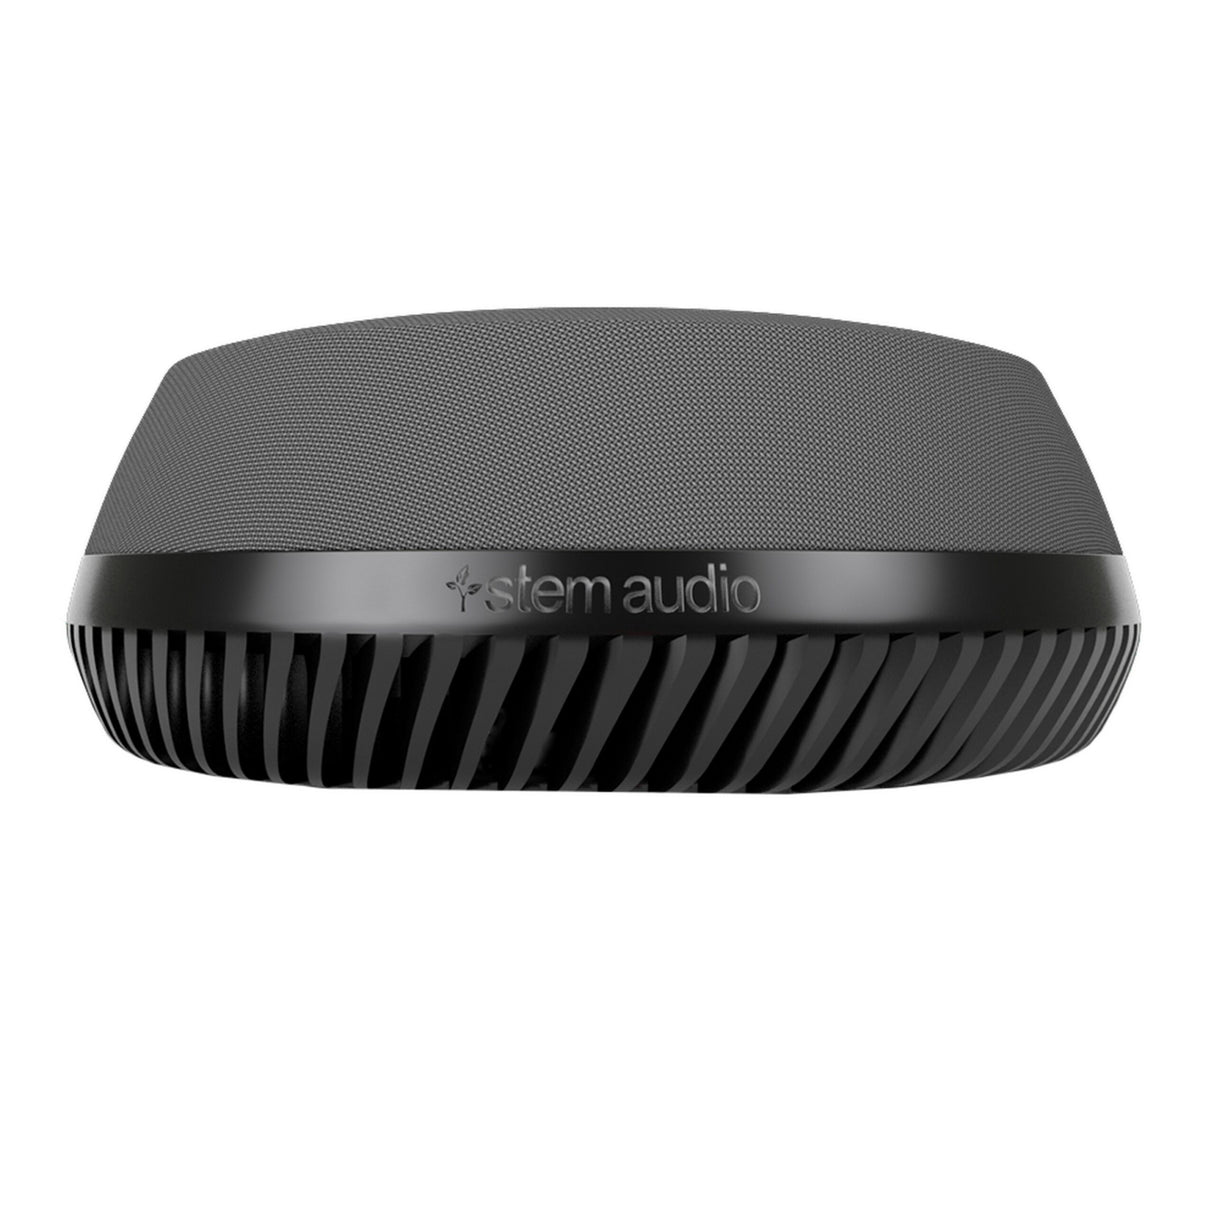 Stem Audio Conference Table Speakerphone for Video Conferencing